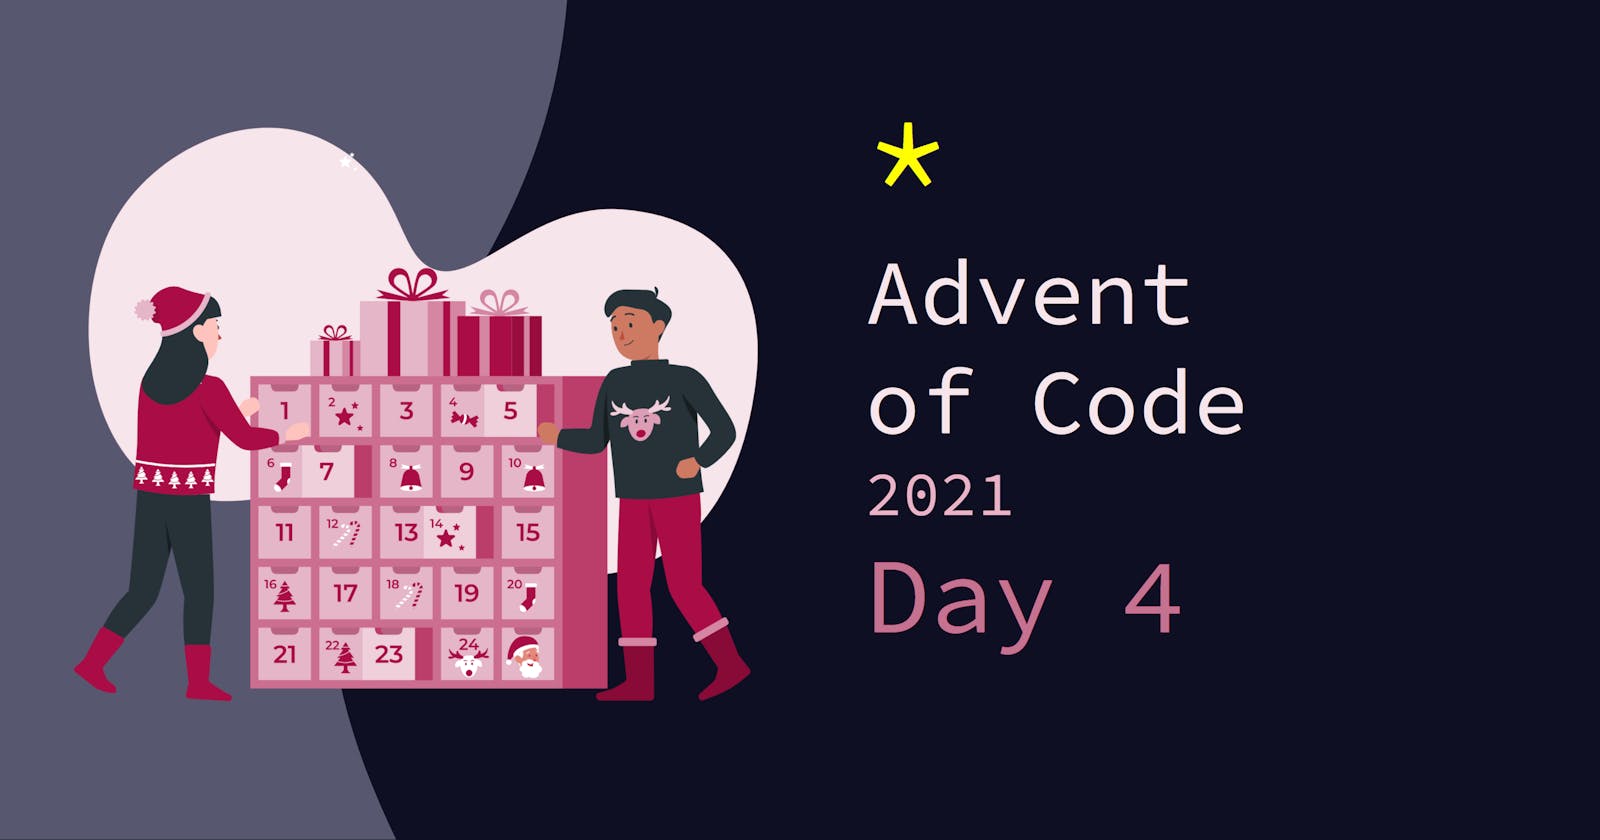 Advent of Code 2021: Day 4